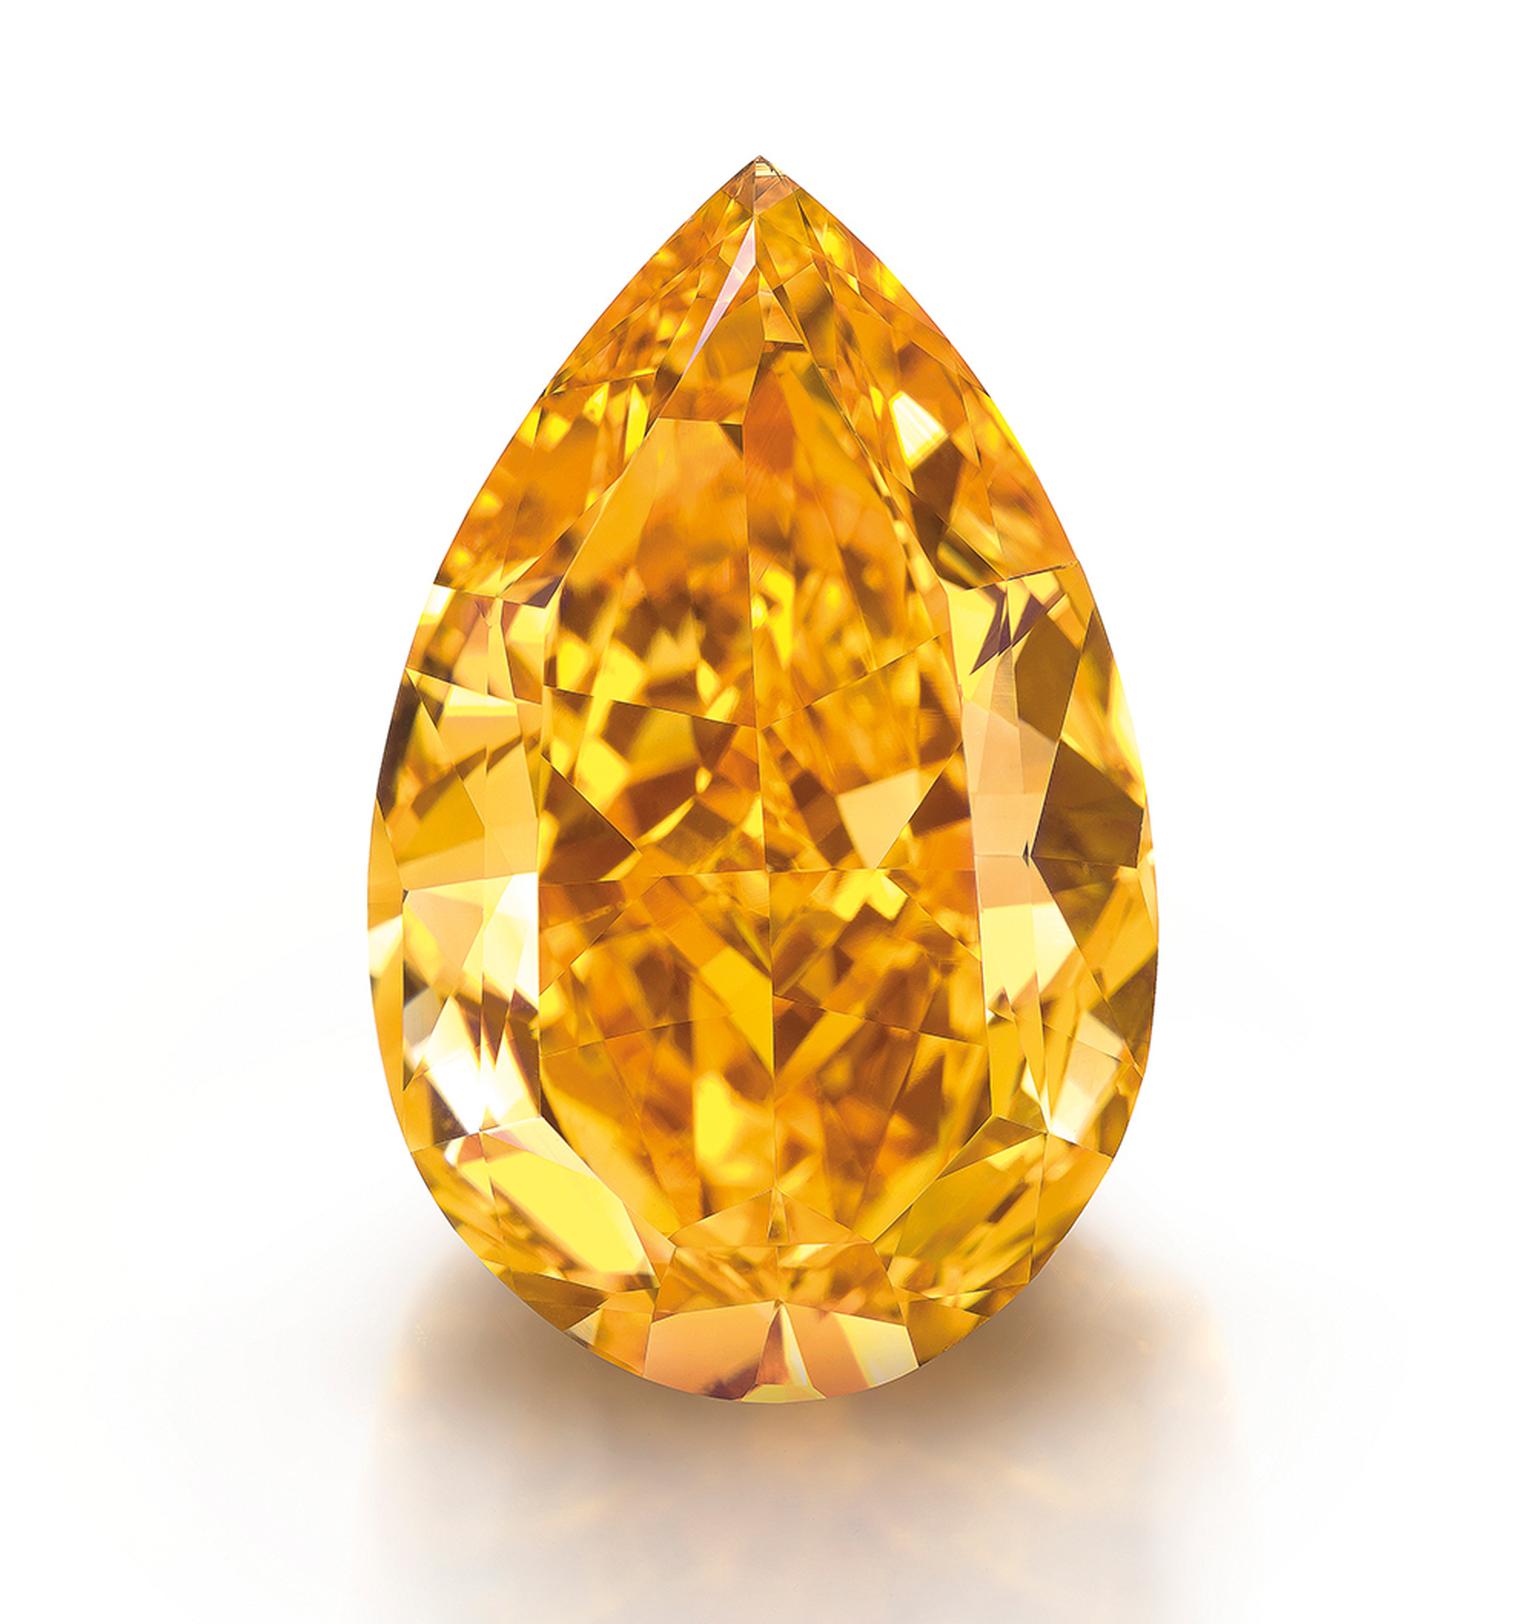 The accolade for the highest price paid per carat for a coloured diamond is held by the 14.82ct 'The Orange' diamond, which fetched $35.54 million at Christie's Geneva in November last year